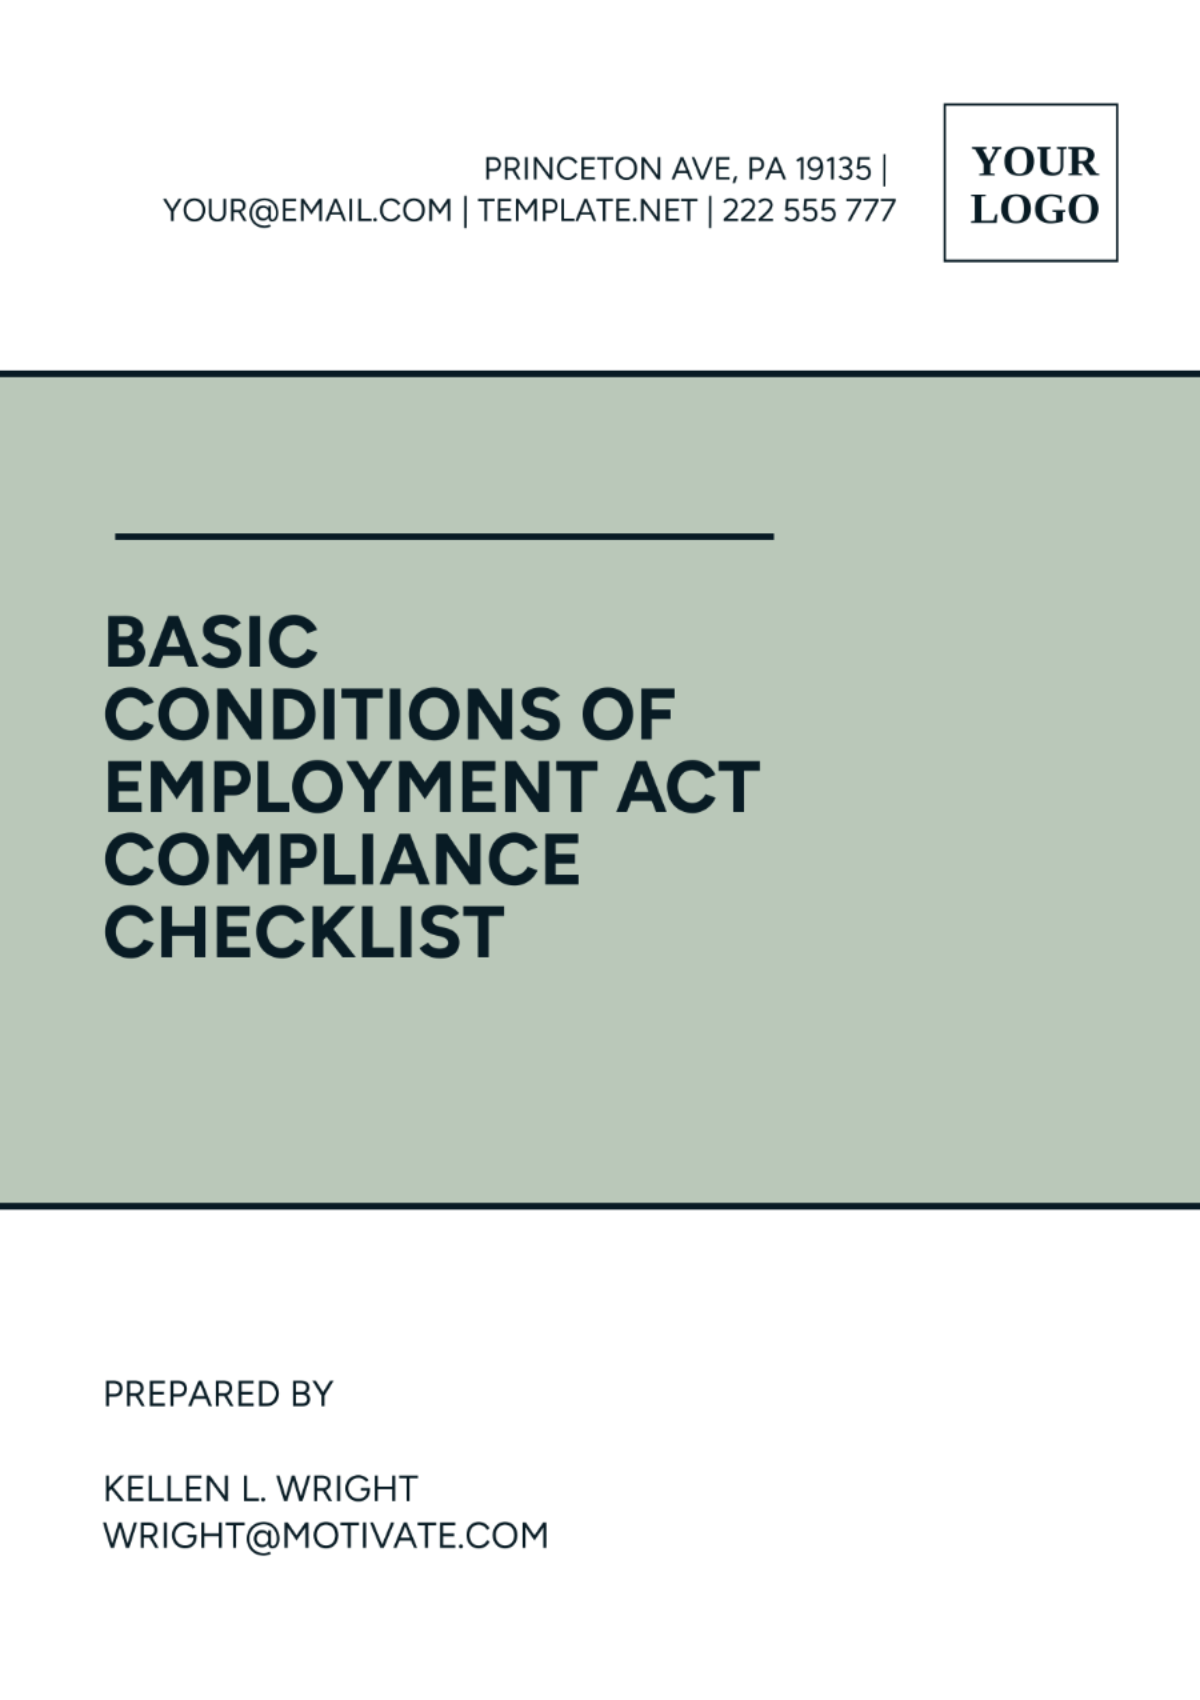 Basic Conditions of Employment Act Compliance Checklist Template